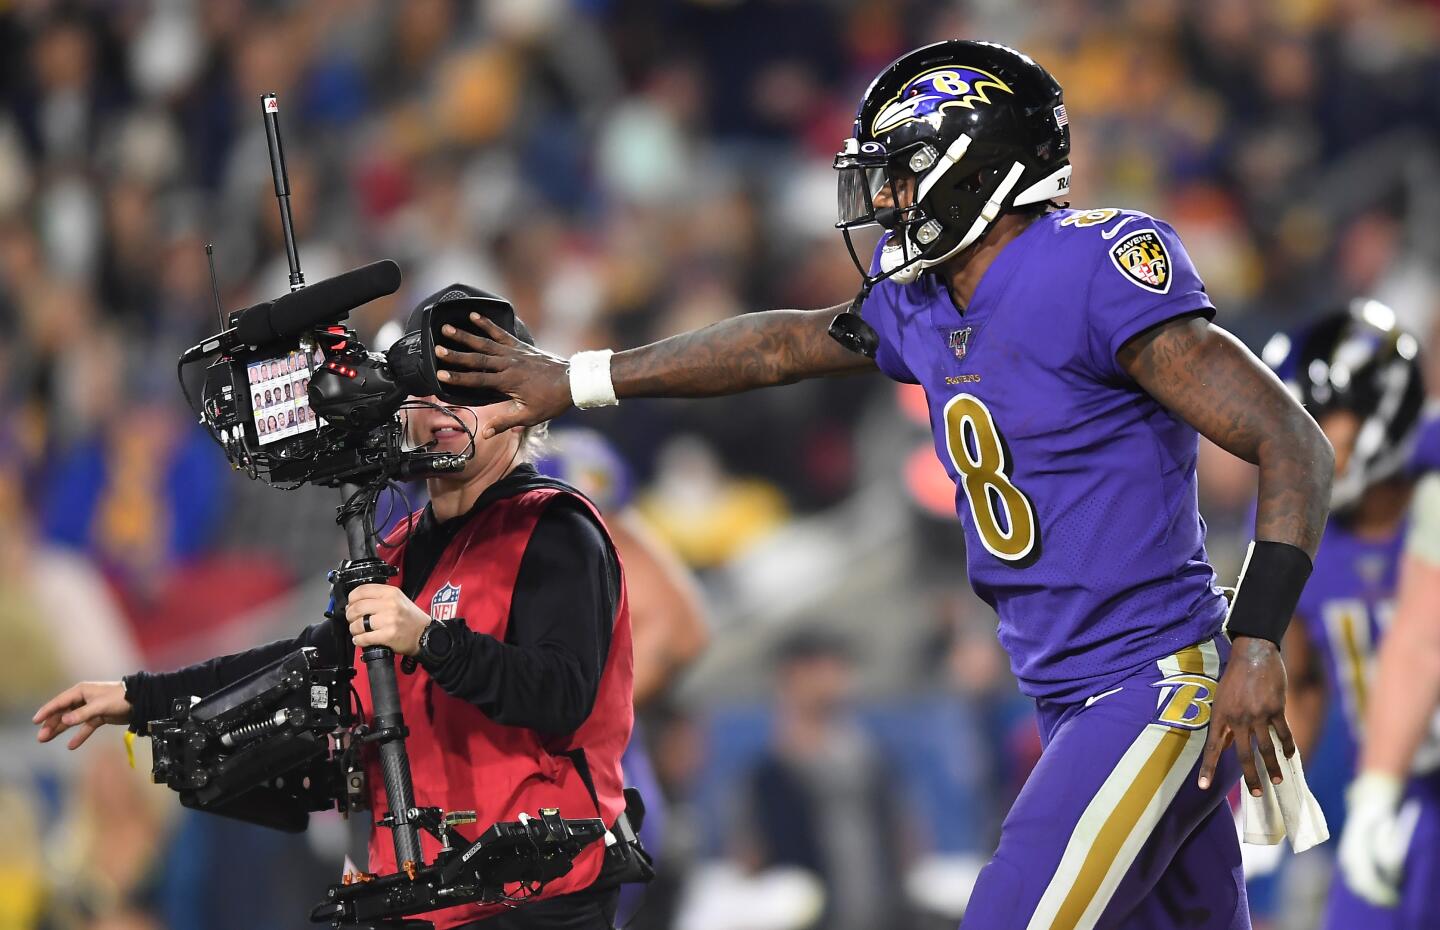 LOS ANGELES, CALIFORNIA NOVEMBER 25, 2019-Ravens quarterback Lamar Jackson covers the lens form a televison cameraman after his team scored a touchdown against the Rams in the 4th quarter at the Coliseum Sunday. (Wally Skalij/Los Angerles Times)